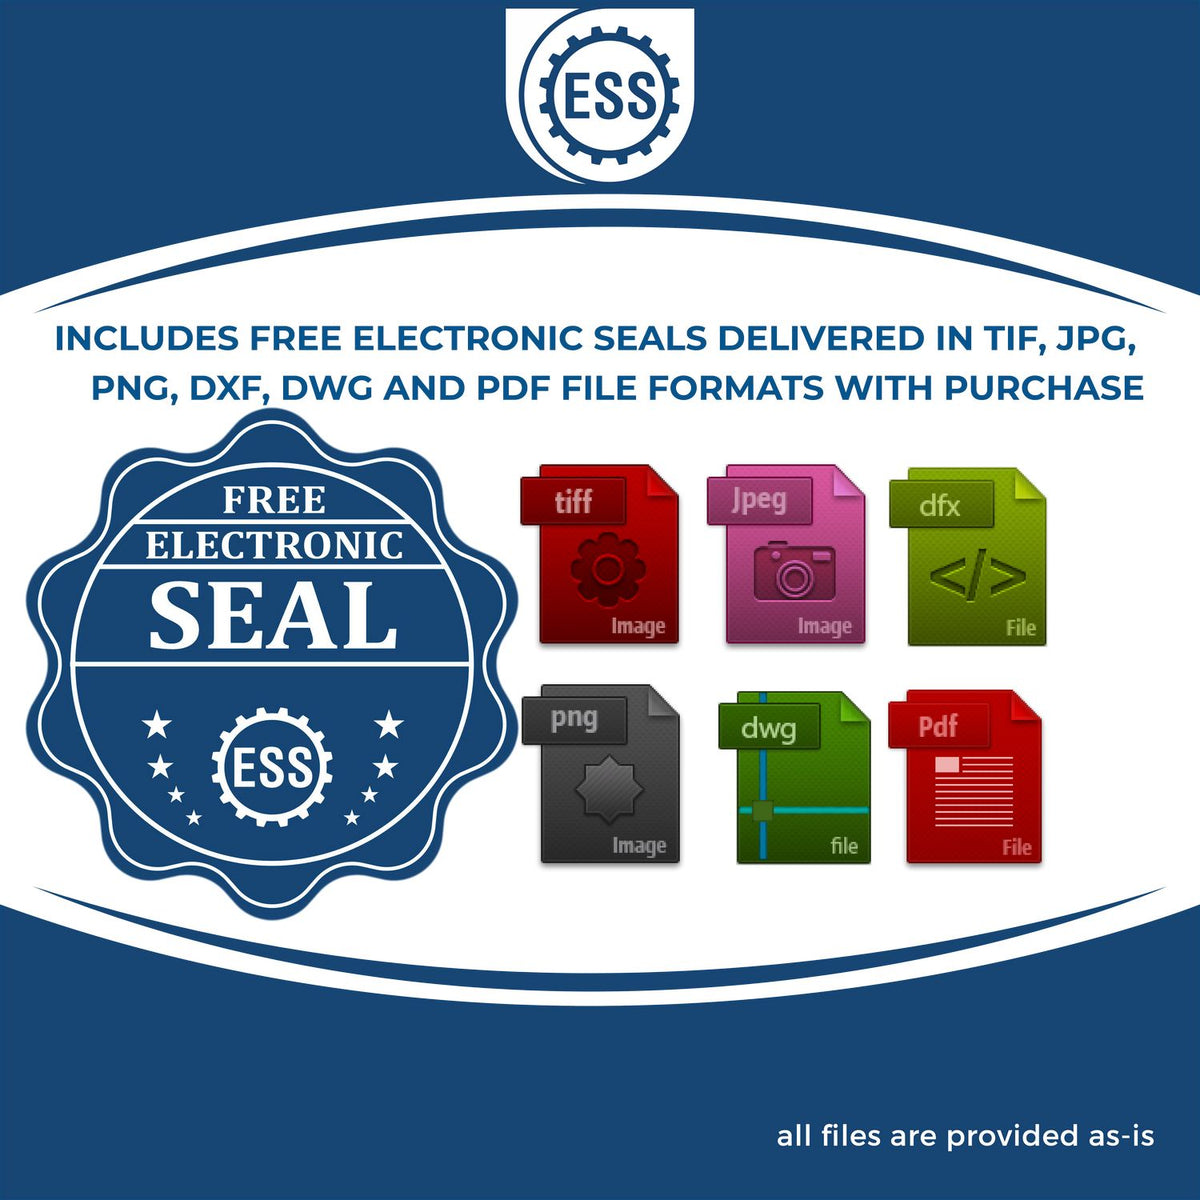 An infographic for the free electronic seal for the Gift Ohio Geologist Seal illustrating the different file type icons such as DXF, DWG, TIF, JPG and PNG.